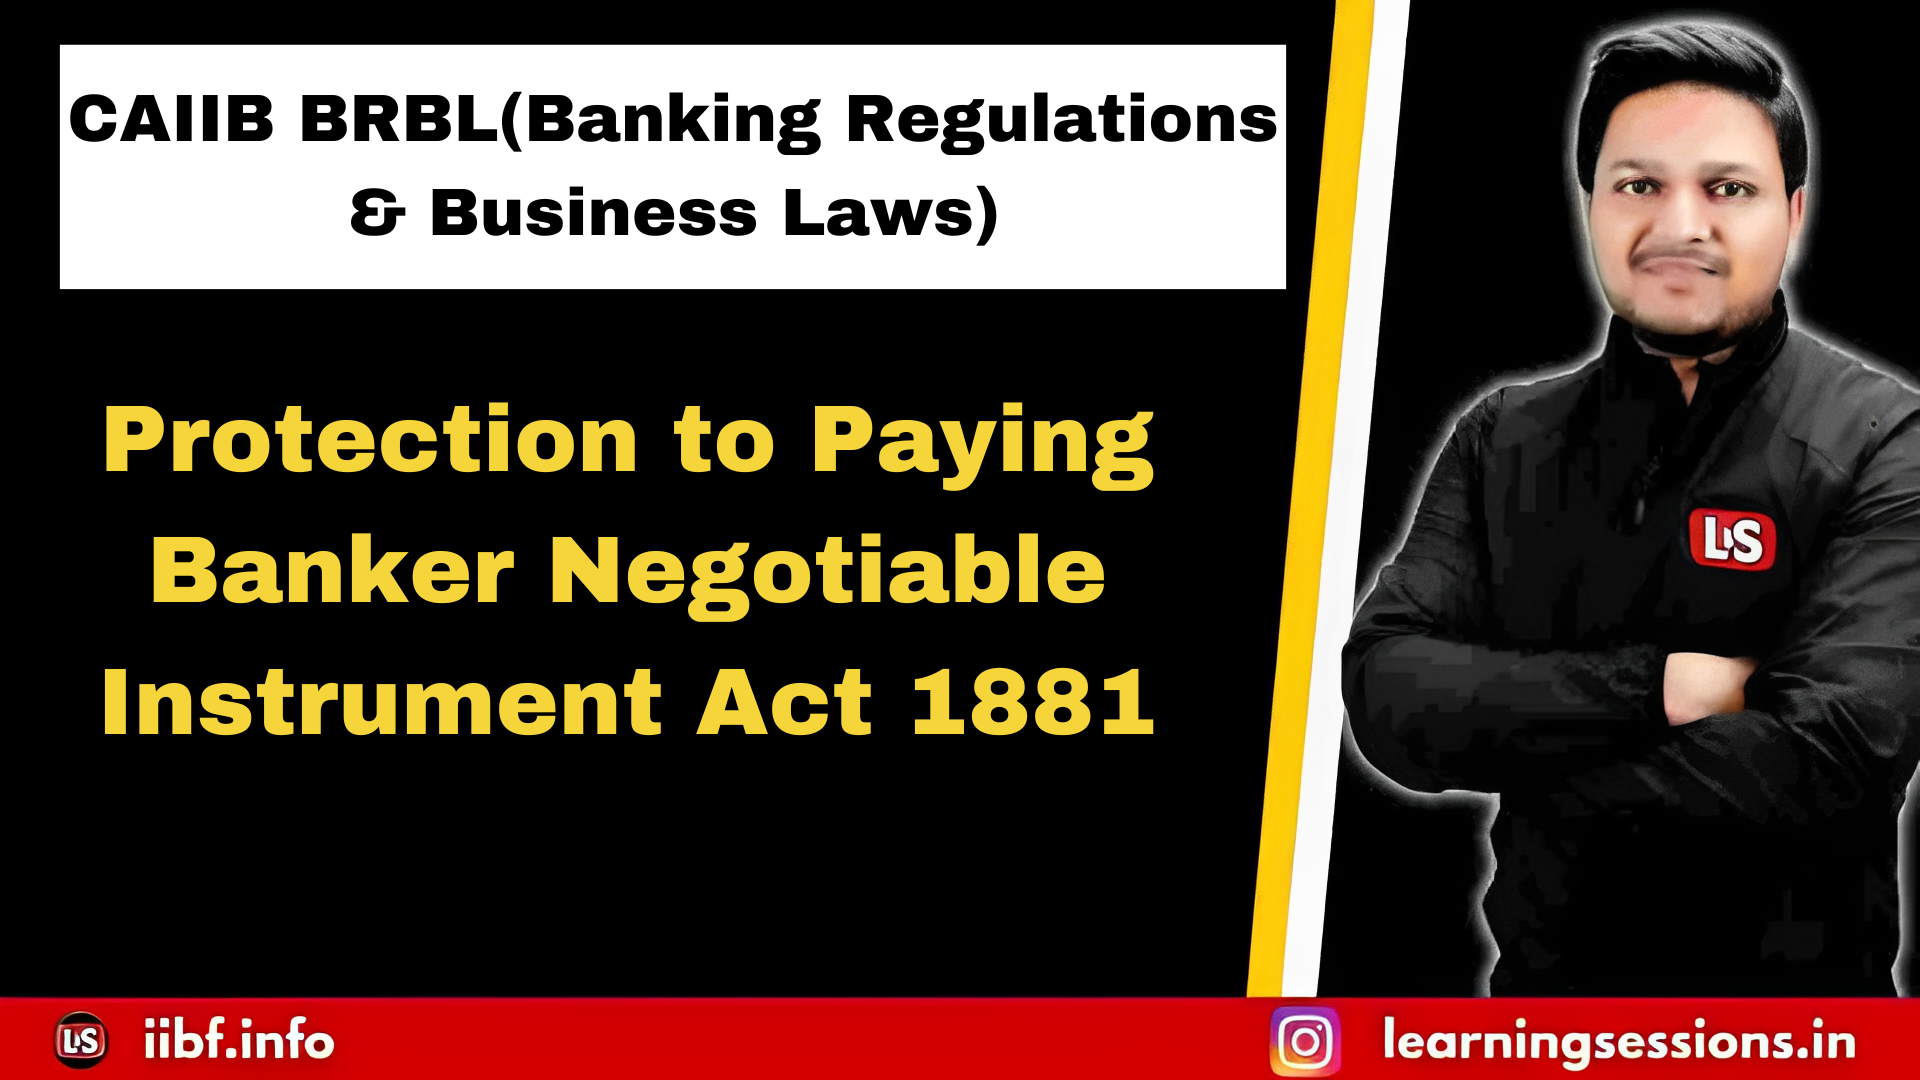 CAIIB BRBL(Banking Regulations & Business Laws)